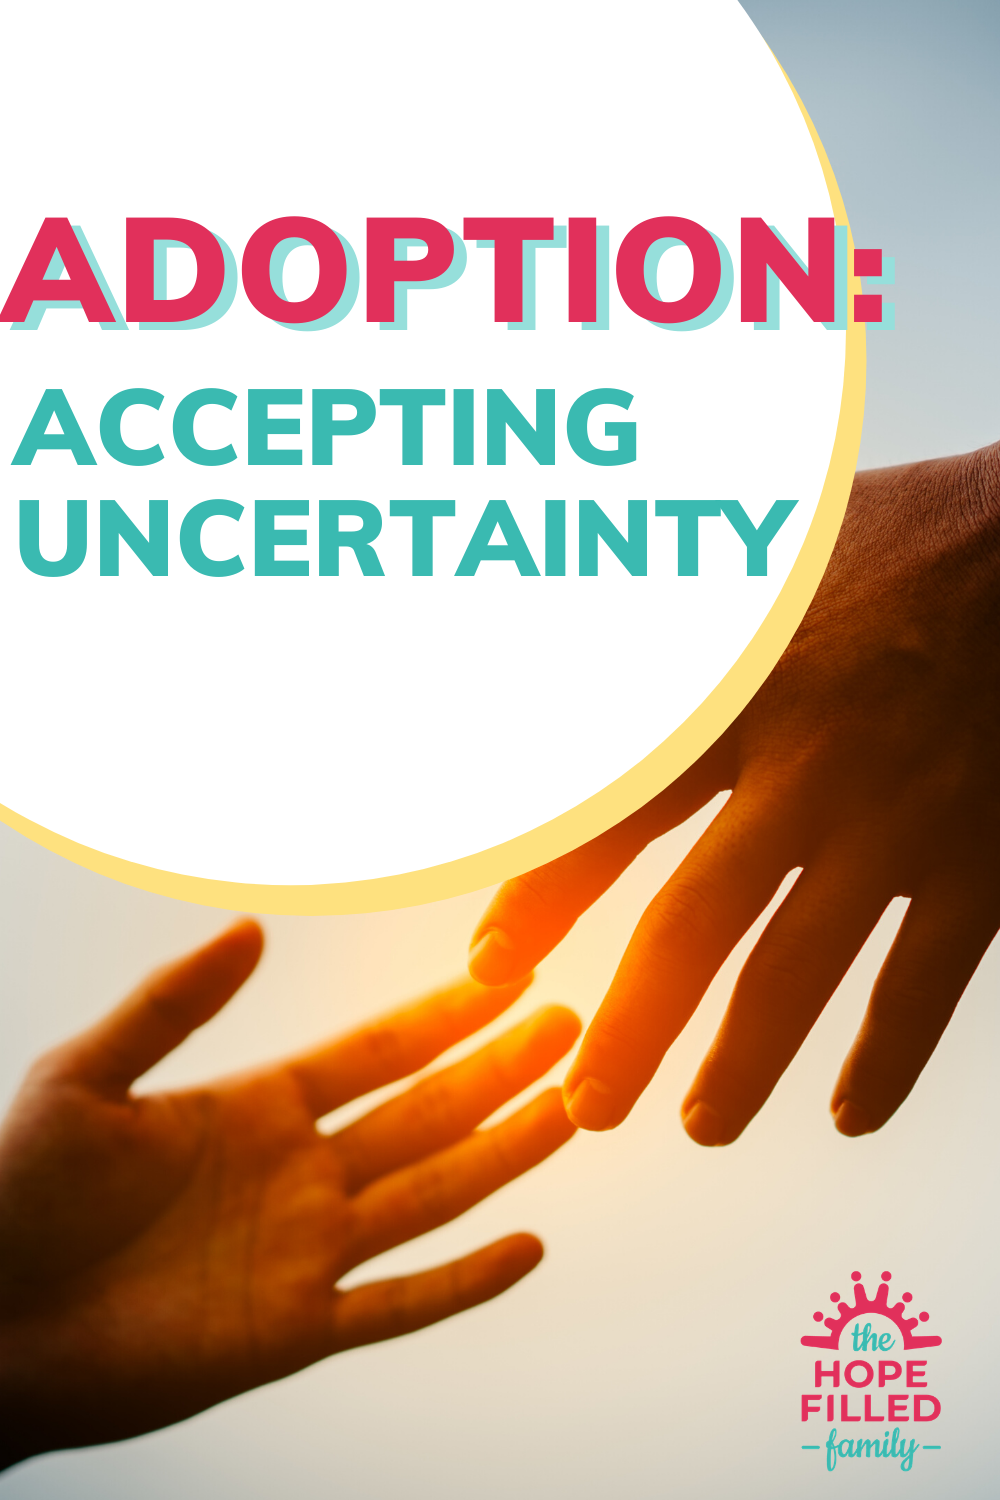 What are the uncertainties surrounding adoption? How can we accept them in faith?